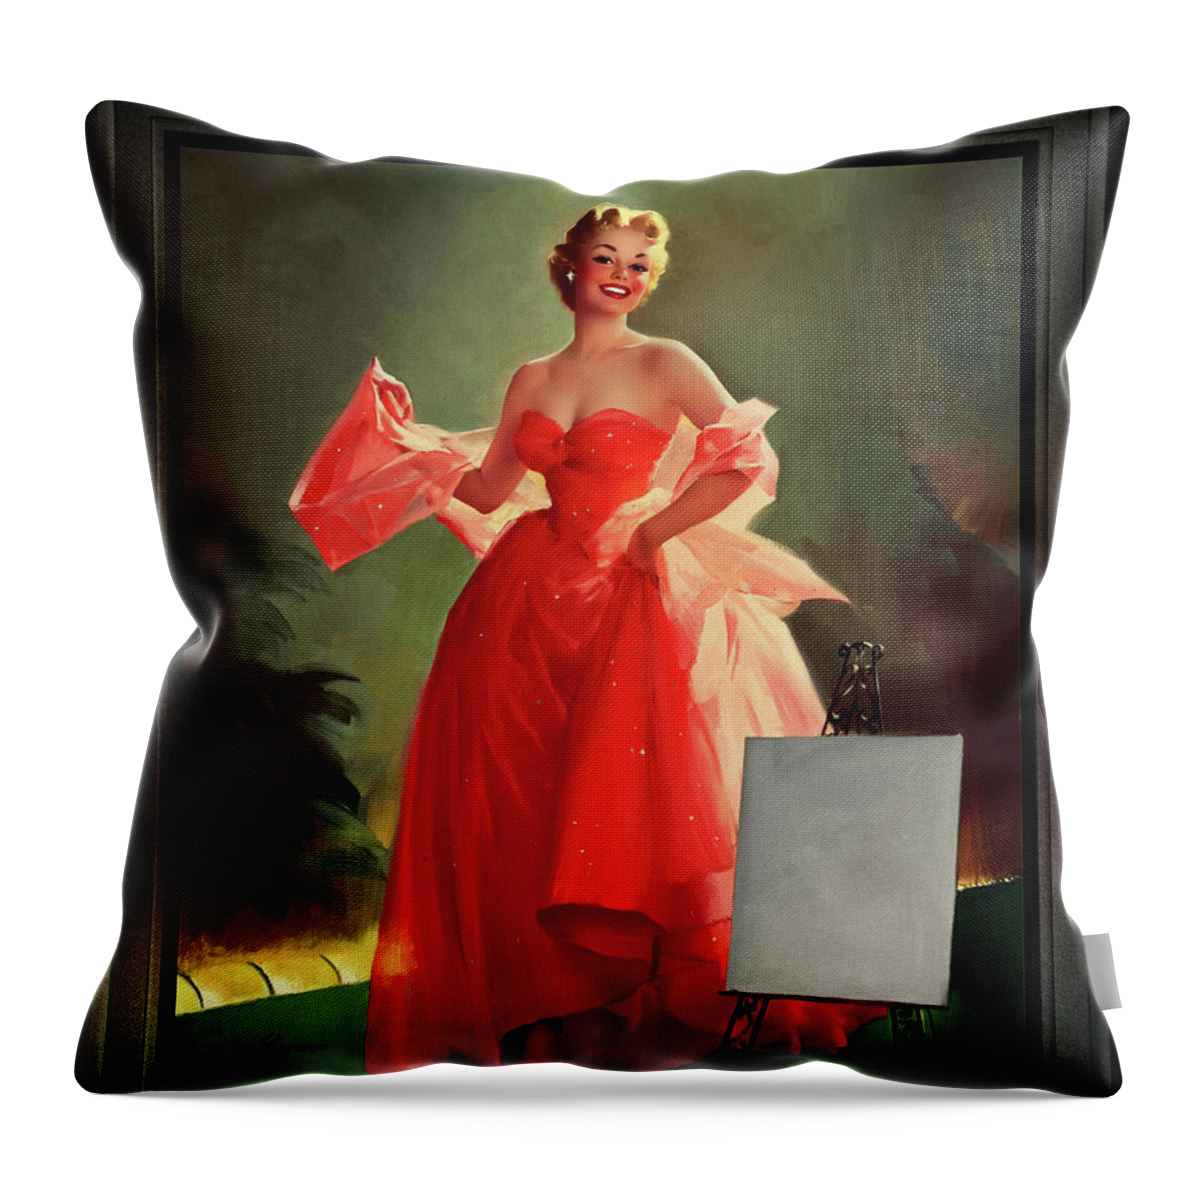 Runway Model Throw Pillow featuring the painting Runway Model In A Pink Dress by Gil Elvgren Pin-up Girl Wall Decor Artwork by Rolando Burbon